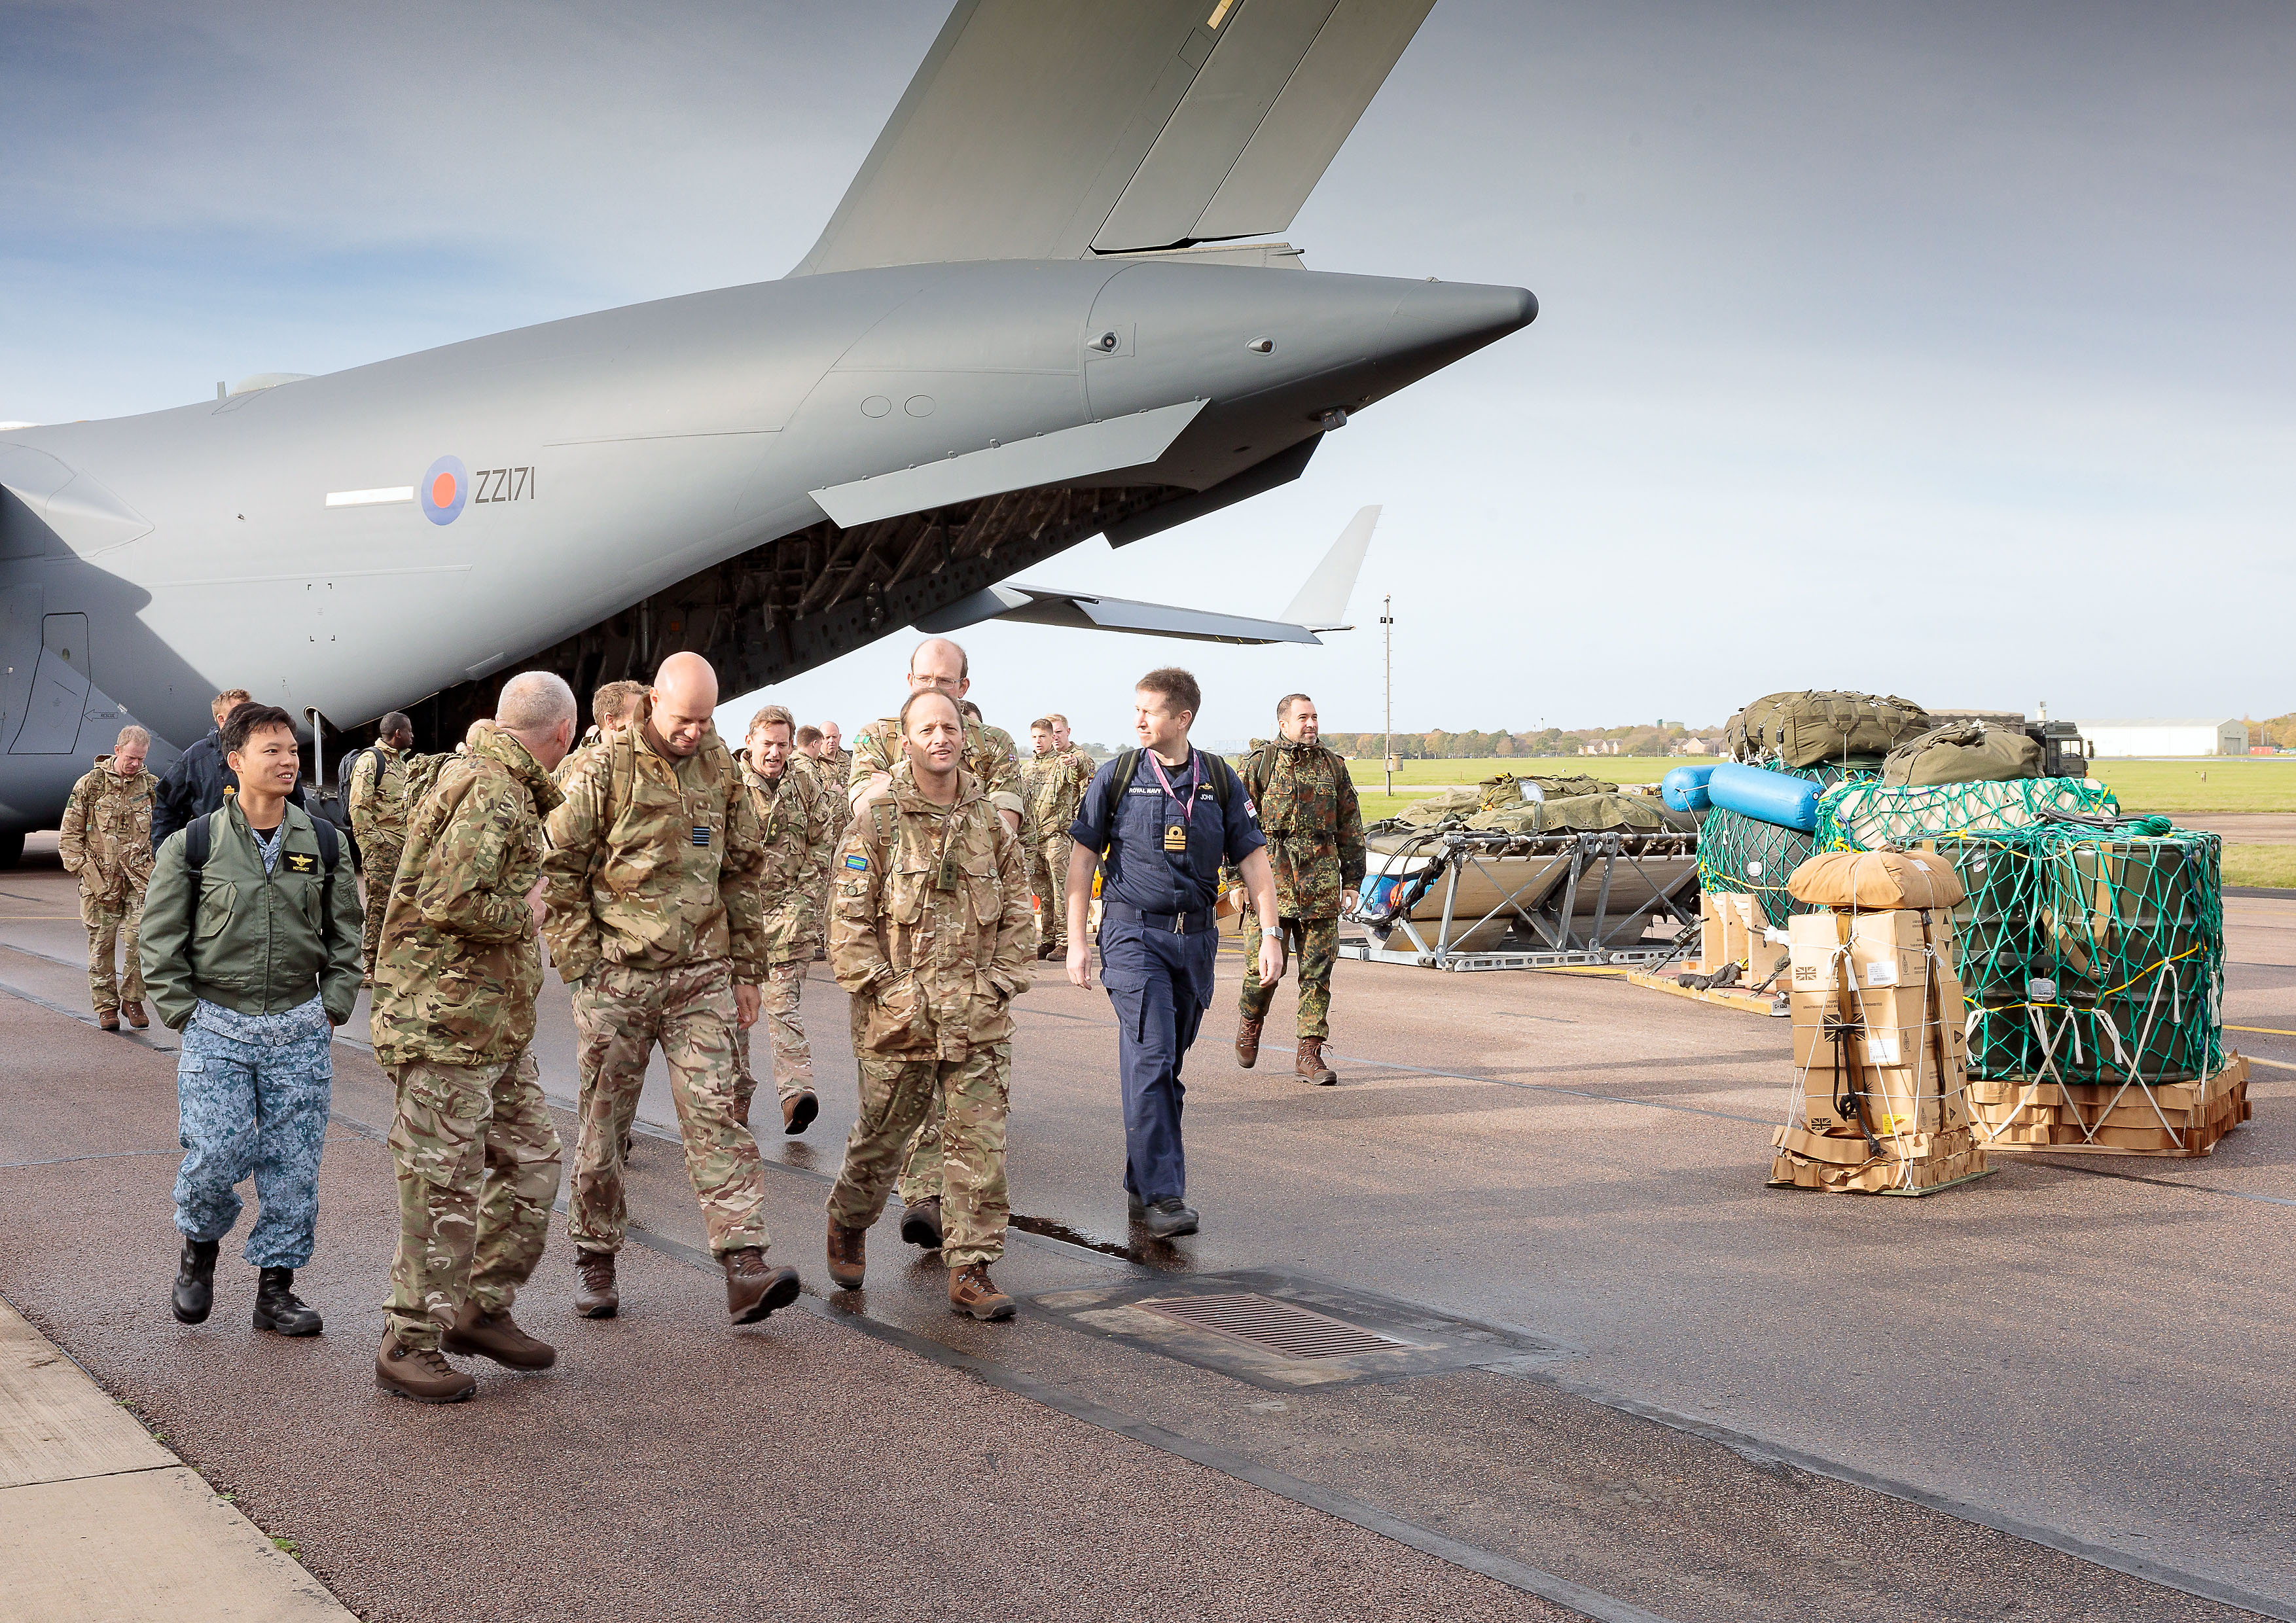 Image shows RAF aviators walking across the airfield away from the Globemaster and cargo crates